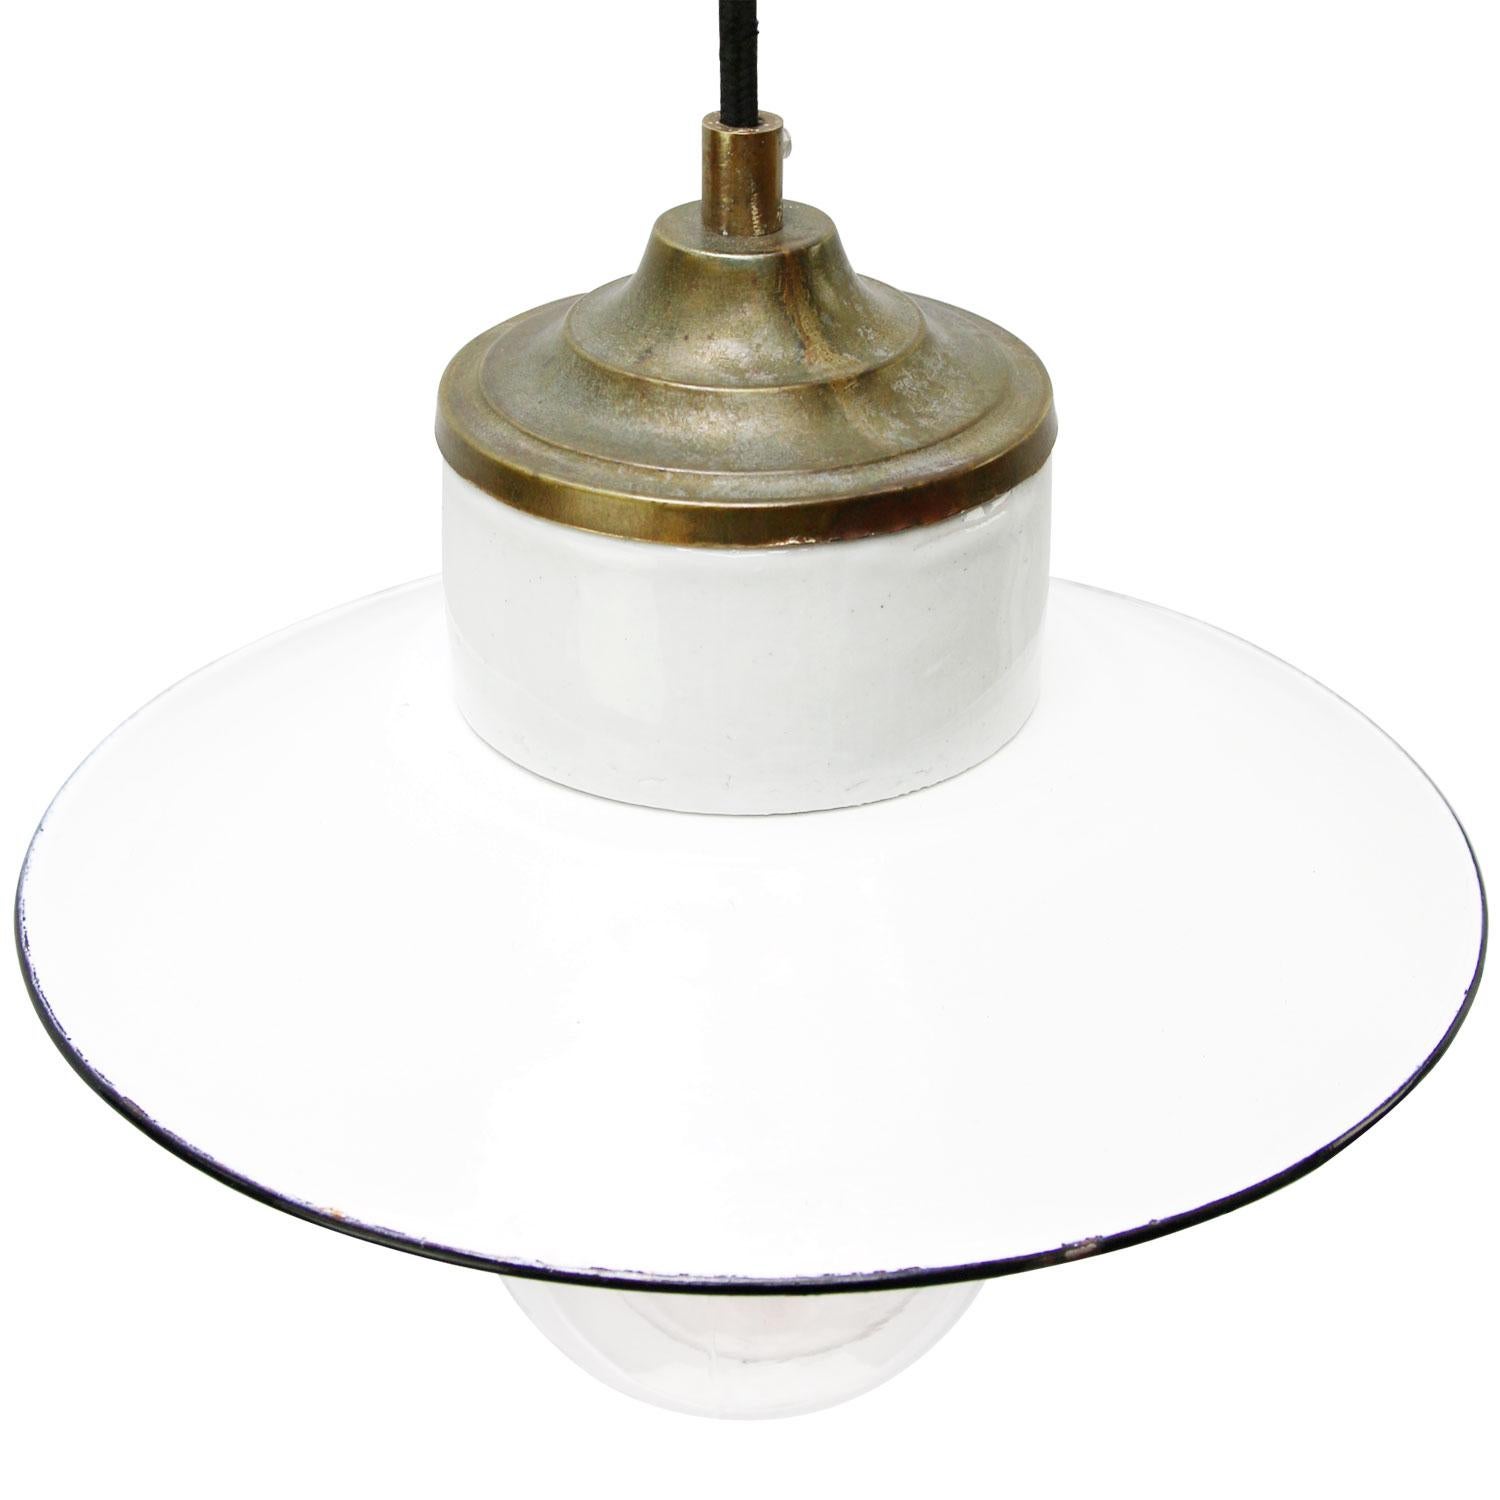 Porcelain Industrial hanging lamp.
White porcelain, brass and clear glass.
Enamel shade
2 conductors, no ground.

Weight: 1.40 kg / 3.1 lb

Priced per individual item. All lamps have been made suitable by international standards for